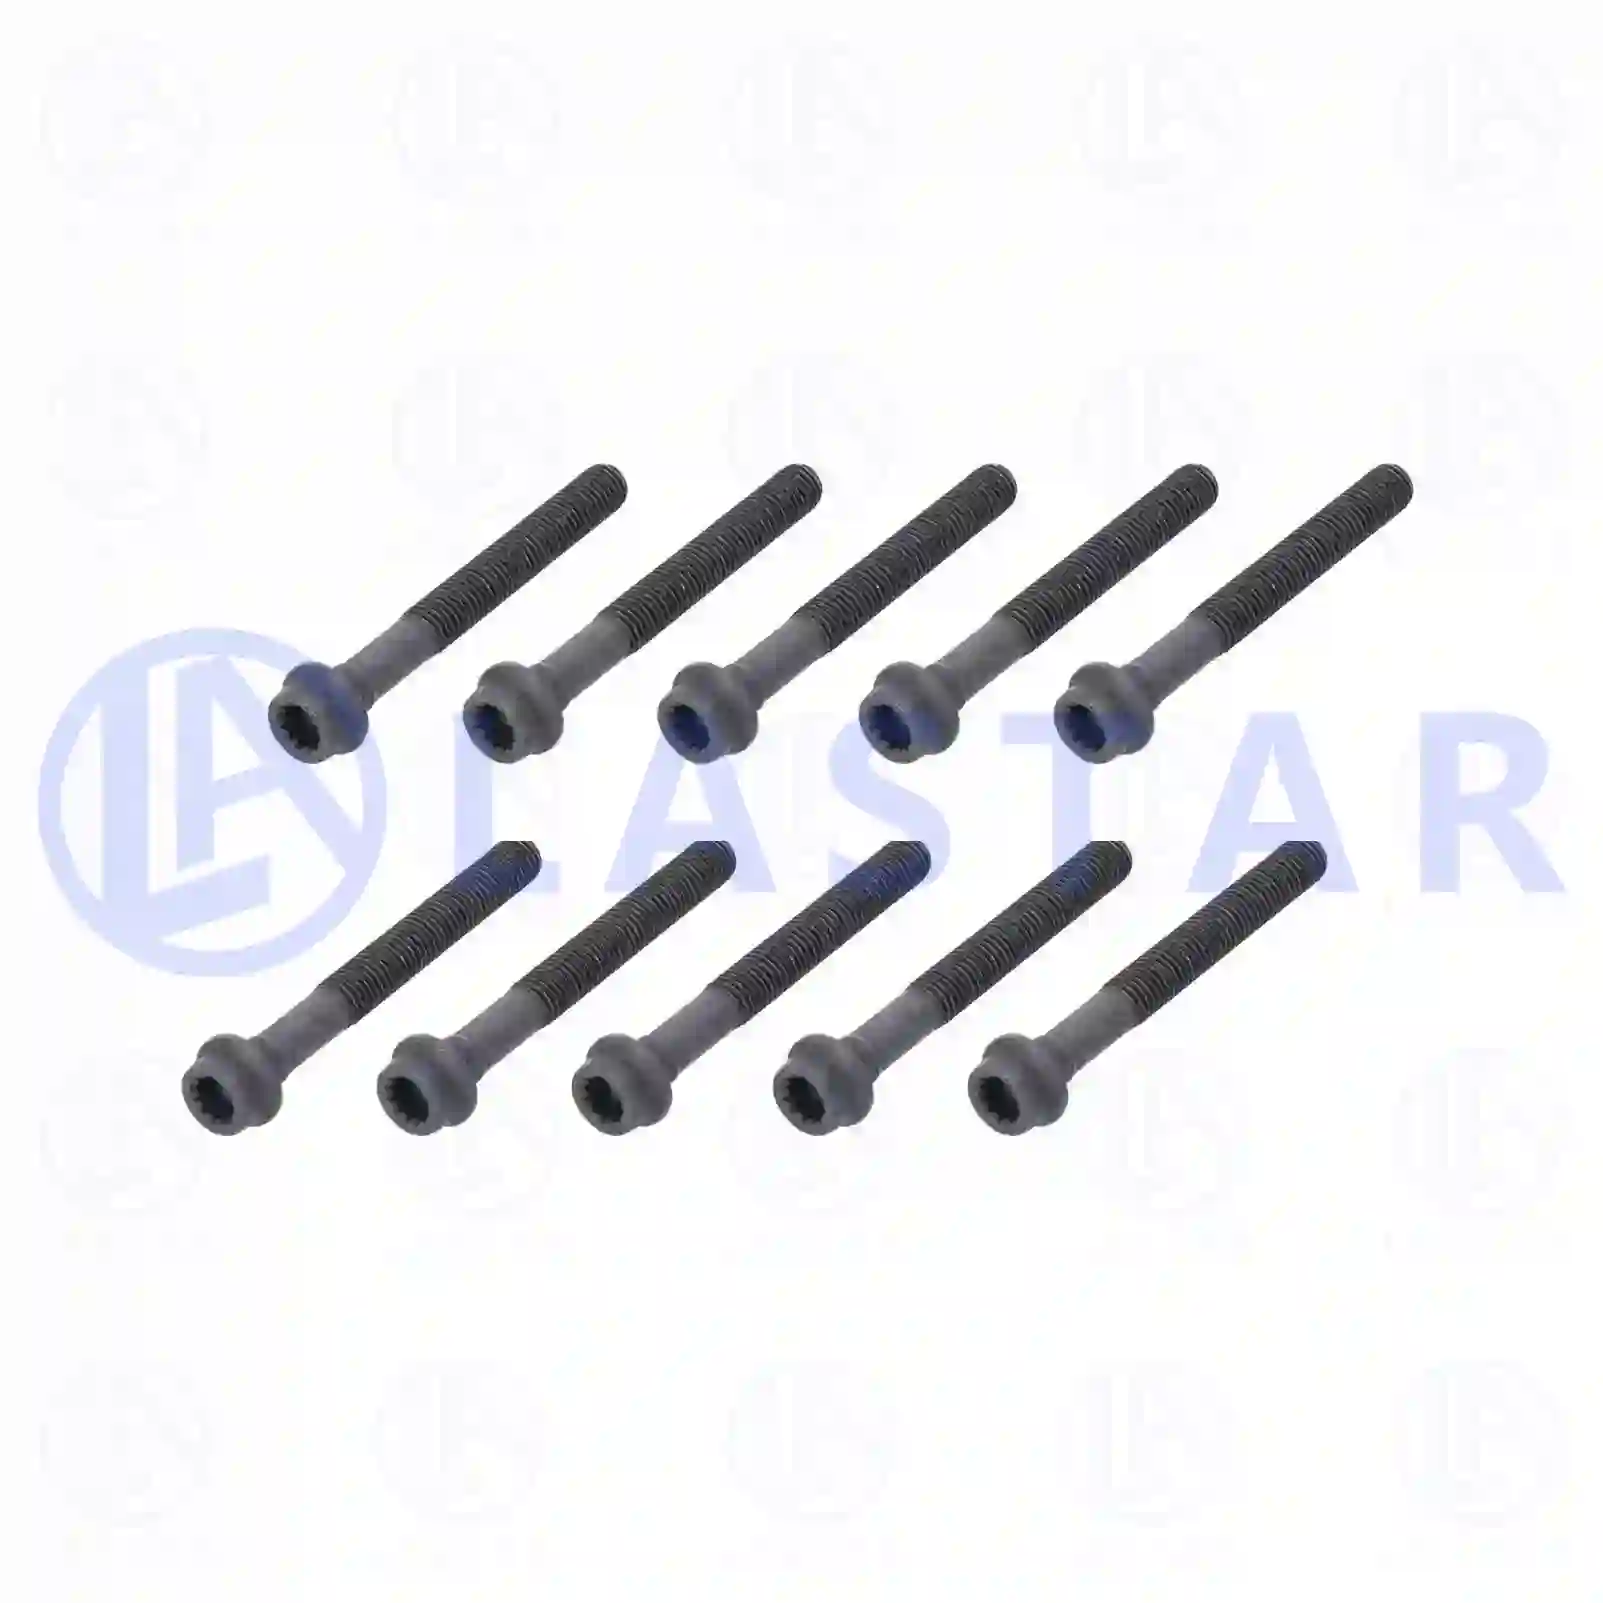  Cylinder head screw kit || Lastar Spare Part | Truck Spare Parts, Auotomotive Spare Parts